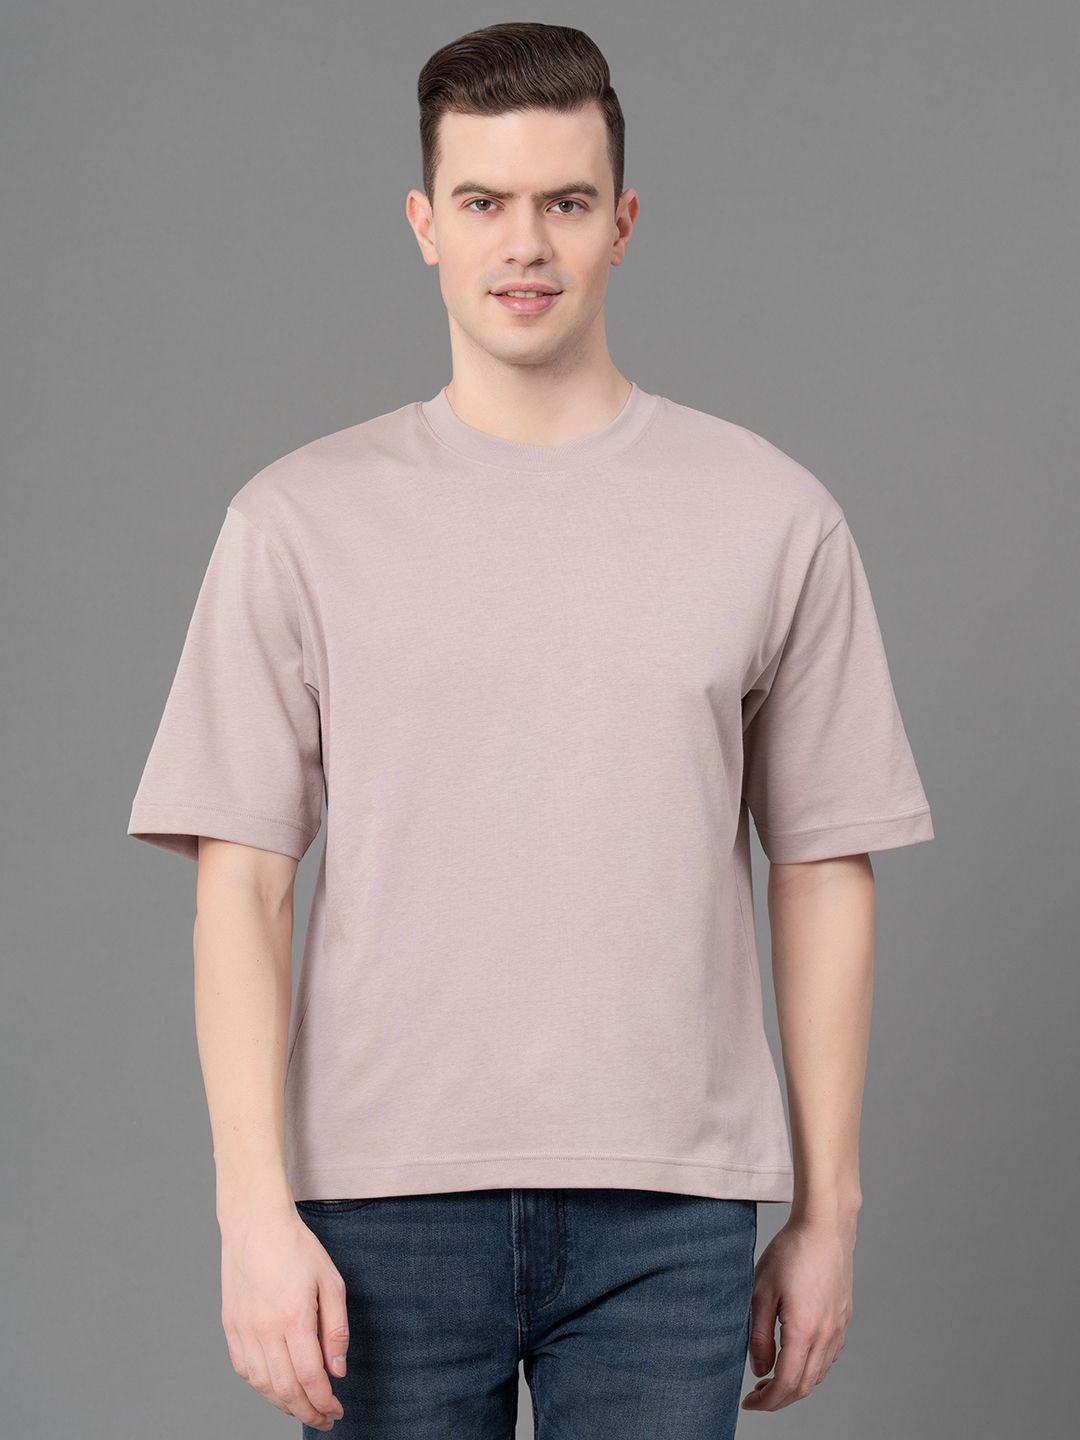     			Red Tape Cotton Blend Oversized Fit Solid Half Sleeves Men's T-Shirt - Pink ( Pack of 1 )